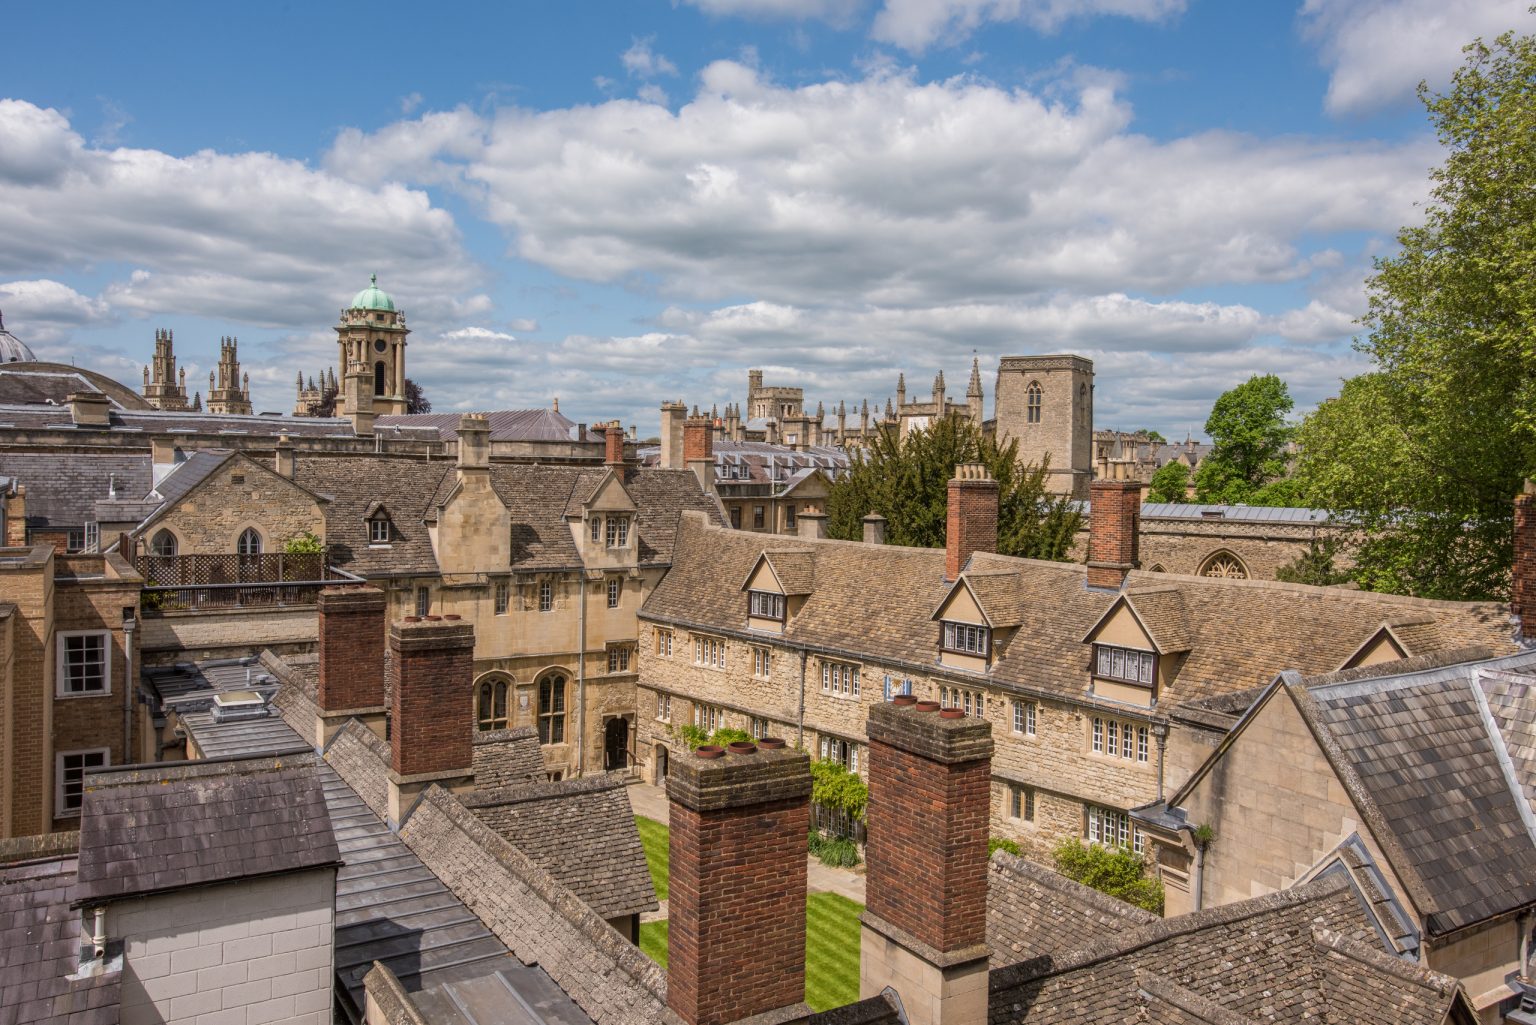 The College site viewed from above, with Oxford skyline in the background